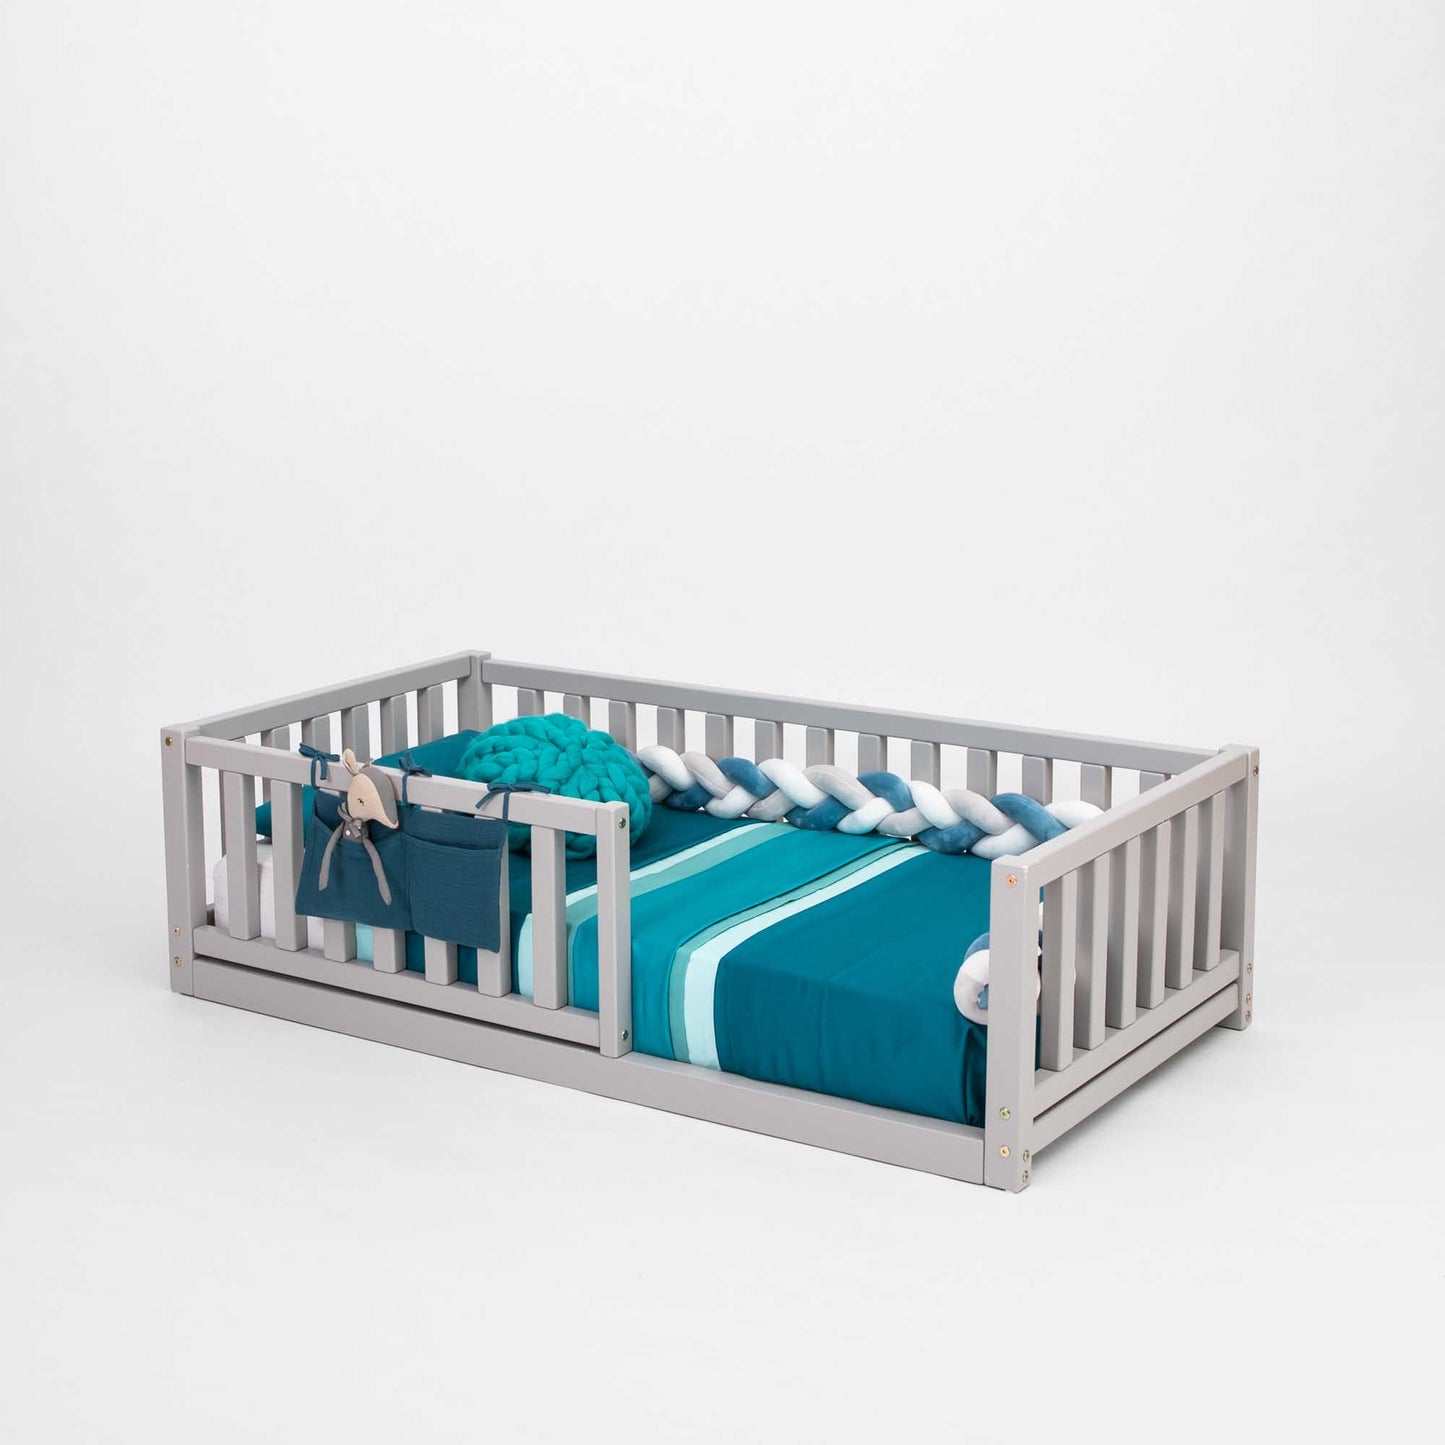 A long-lasting 2-in-1 toddler bed on legs with a vertical rail fence crafted from solid pine, from the brand Sweet Home From Wood, with blue and white bedding.